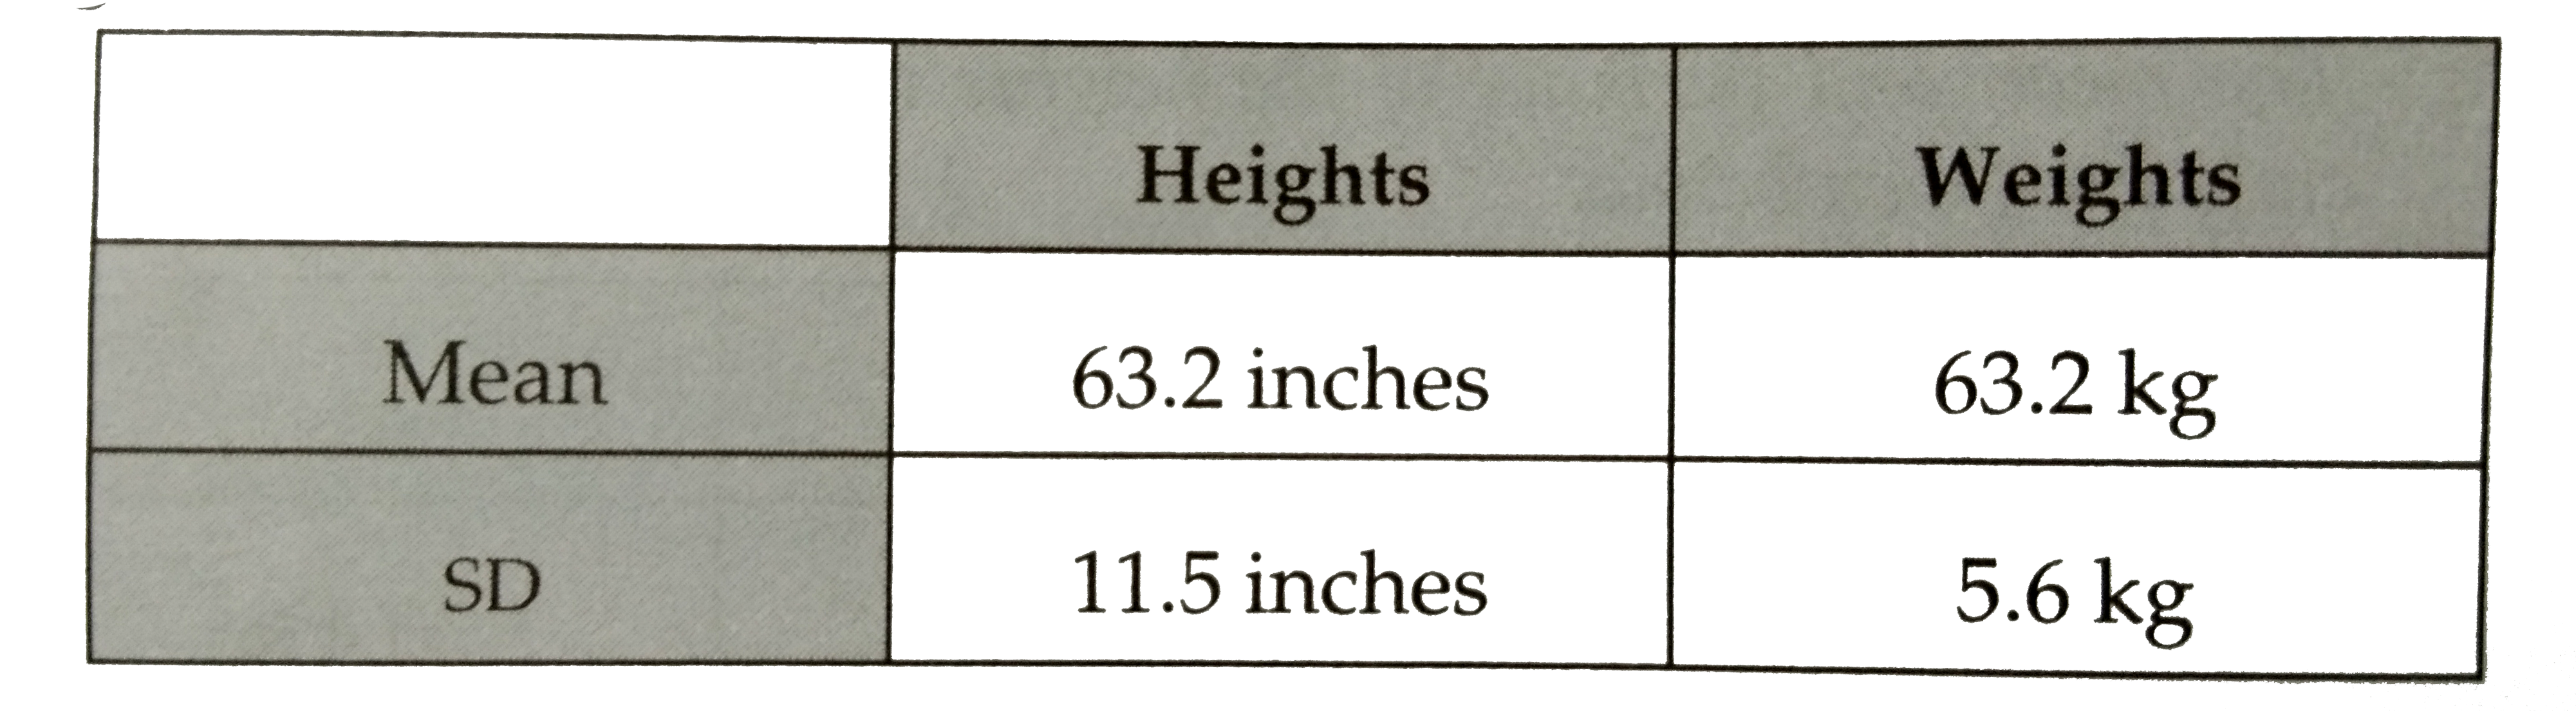 The mean and variance of the heights and weights of the students of a class are given below:      Which shows more variability, heights or weights?